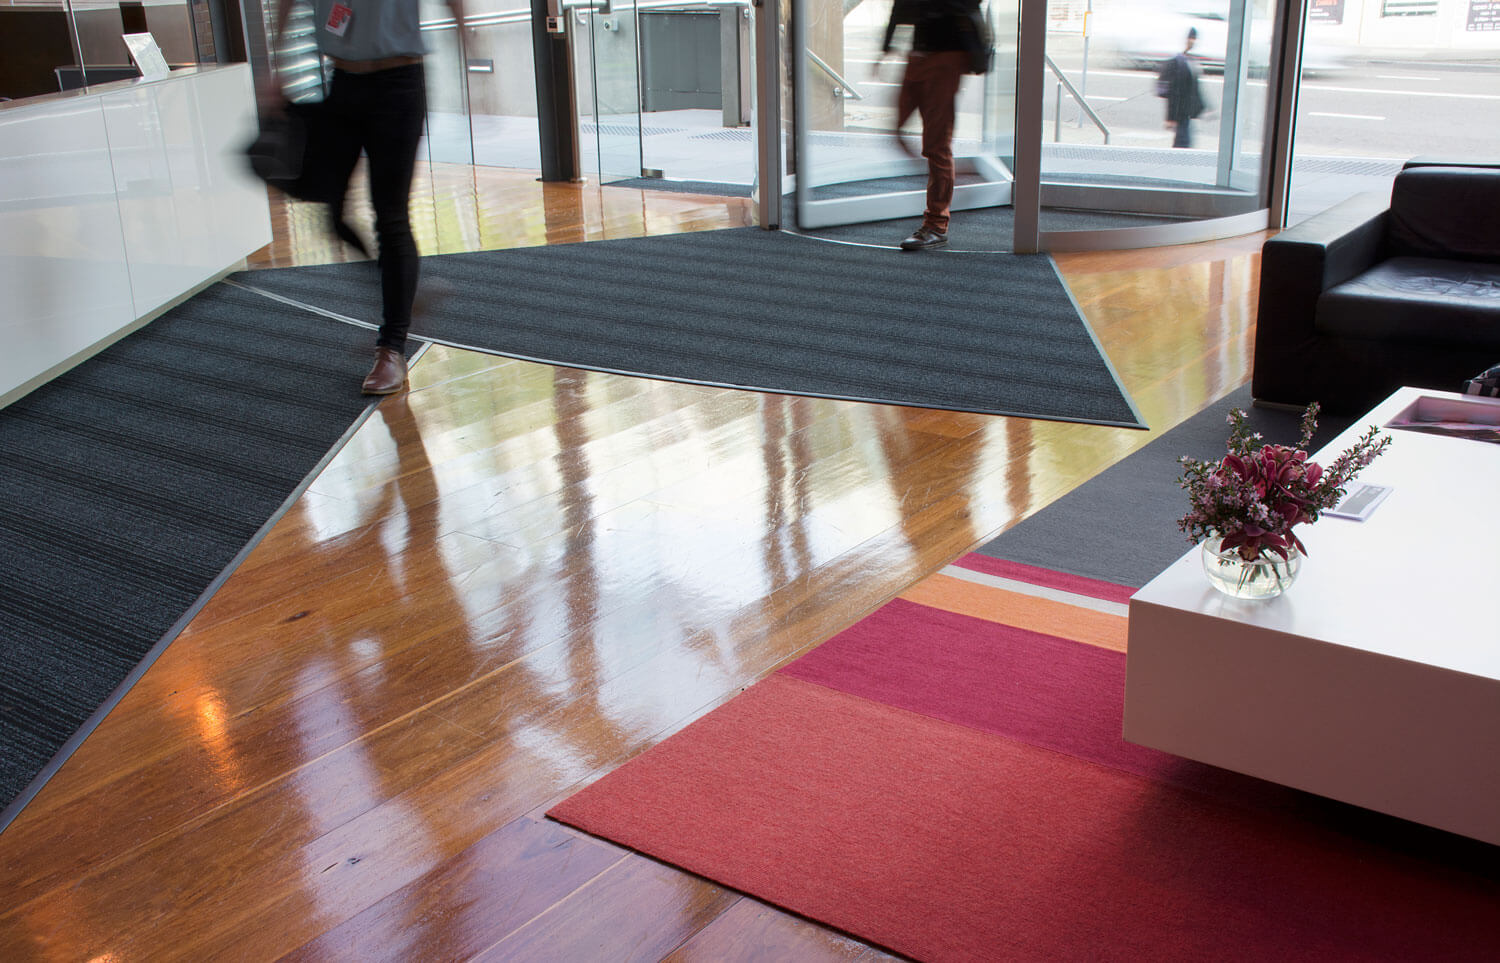 Custom shaped entrance mats are laid in front of revolving doors. People in work clothes walk over the top.